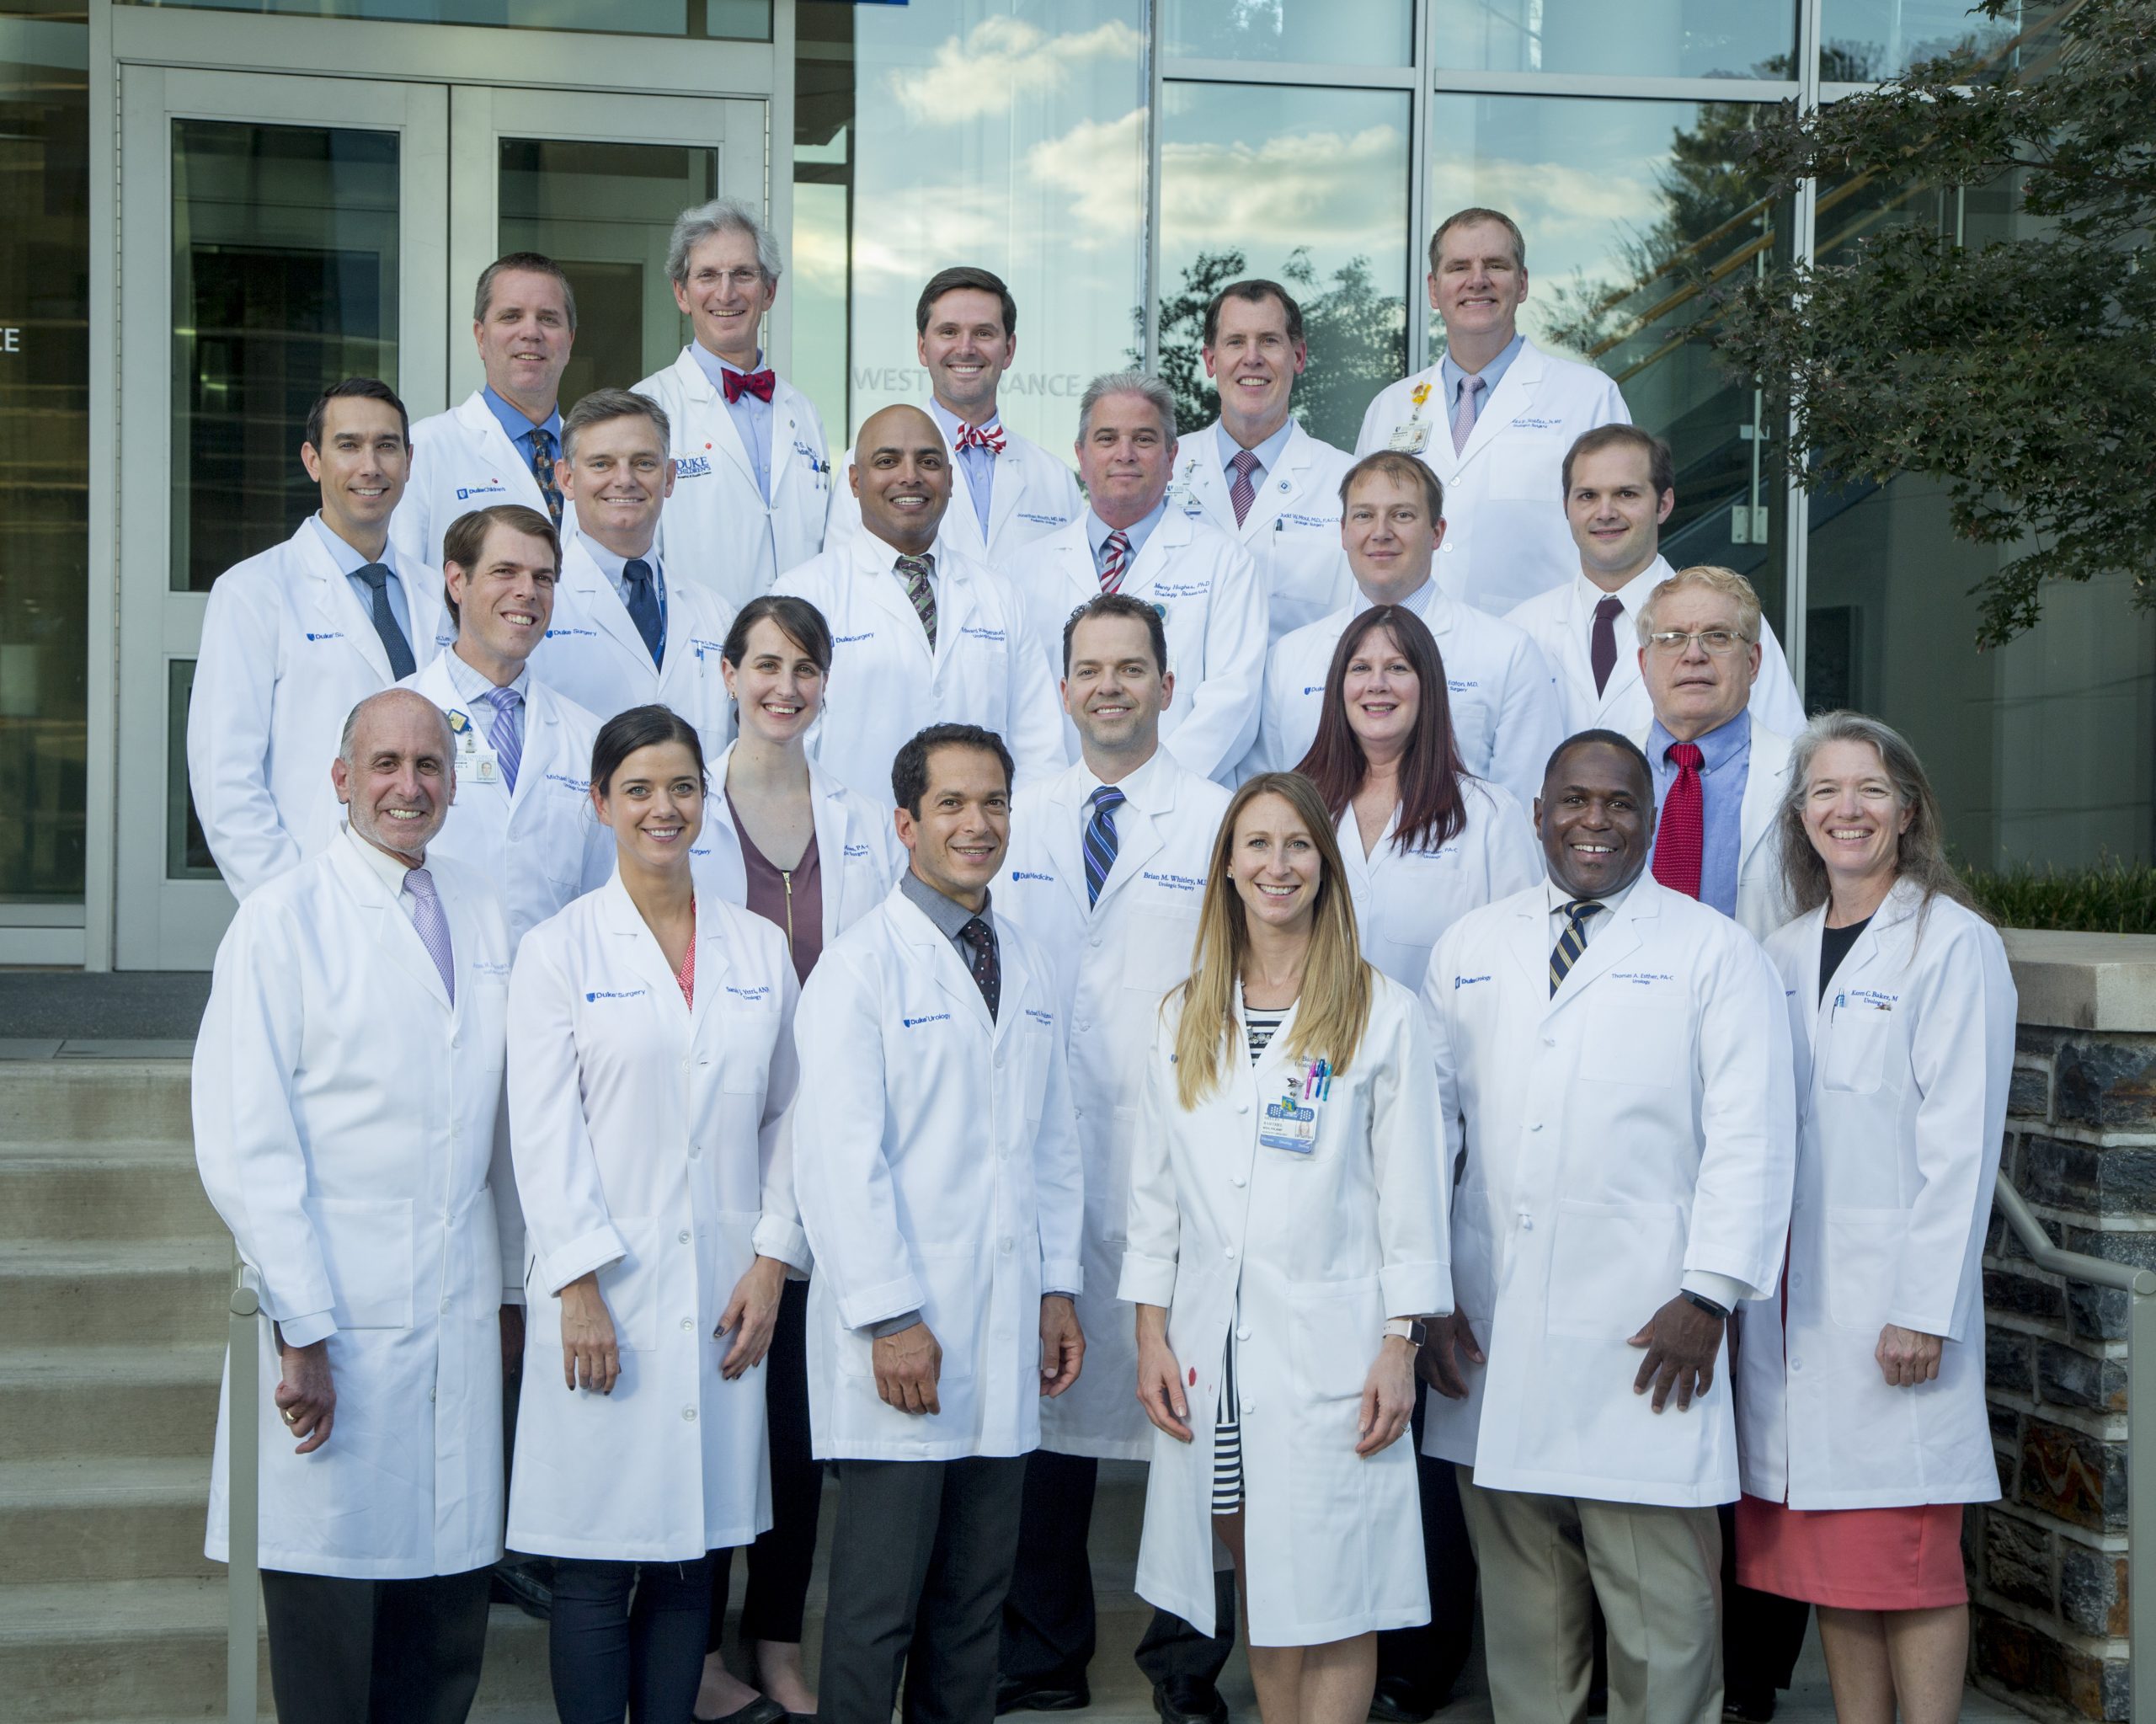 Urology provider team photo on Trent Semans Center steps: one of the several hundred group pictures I've done in my Duke career for the Department of Medicine or School of Medicine.